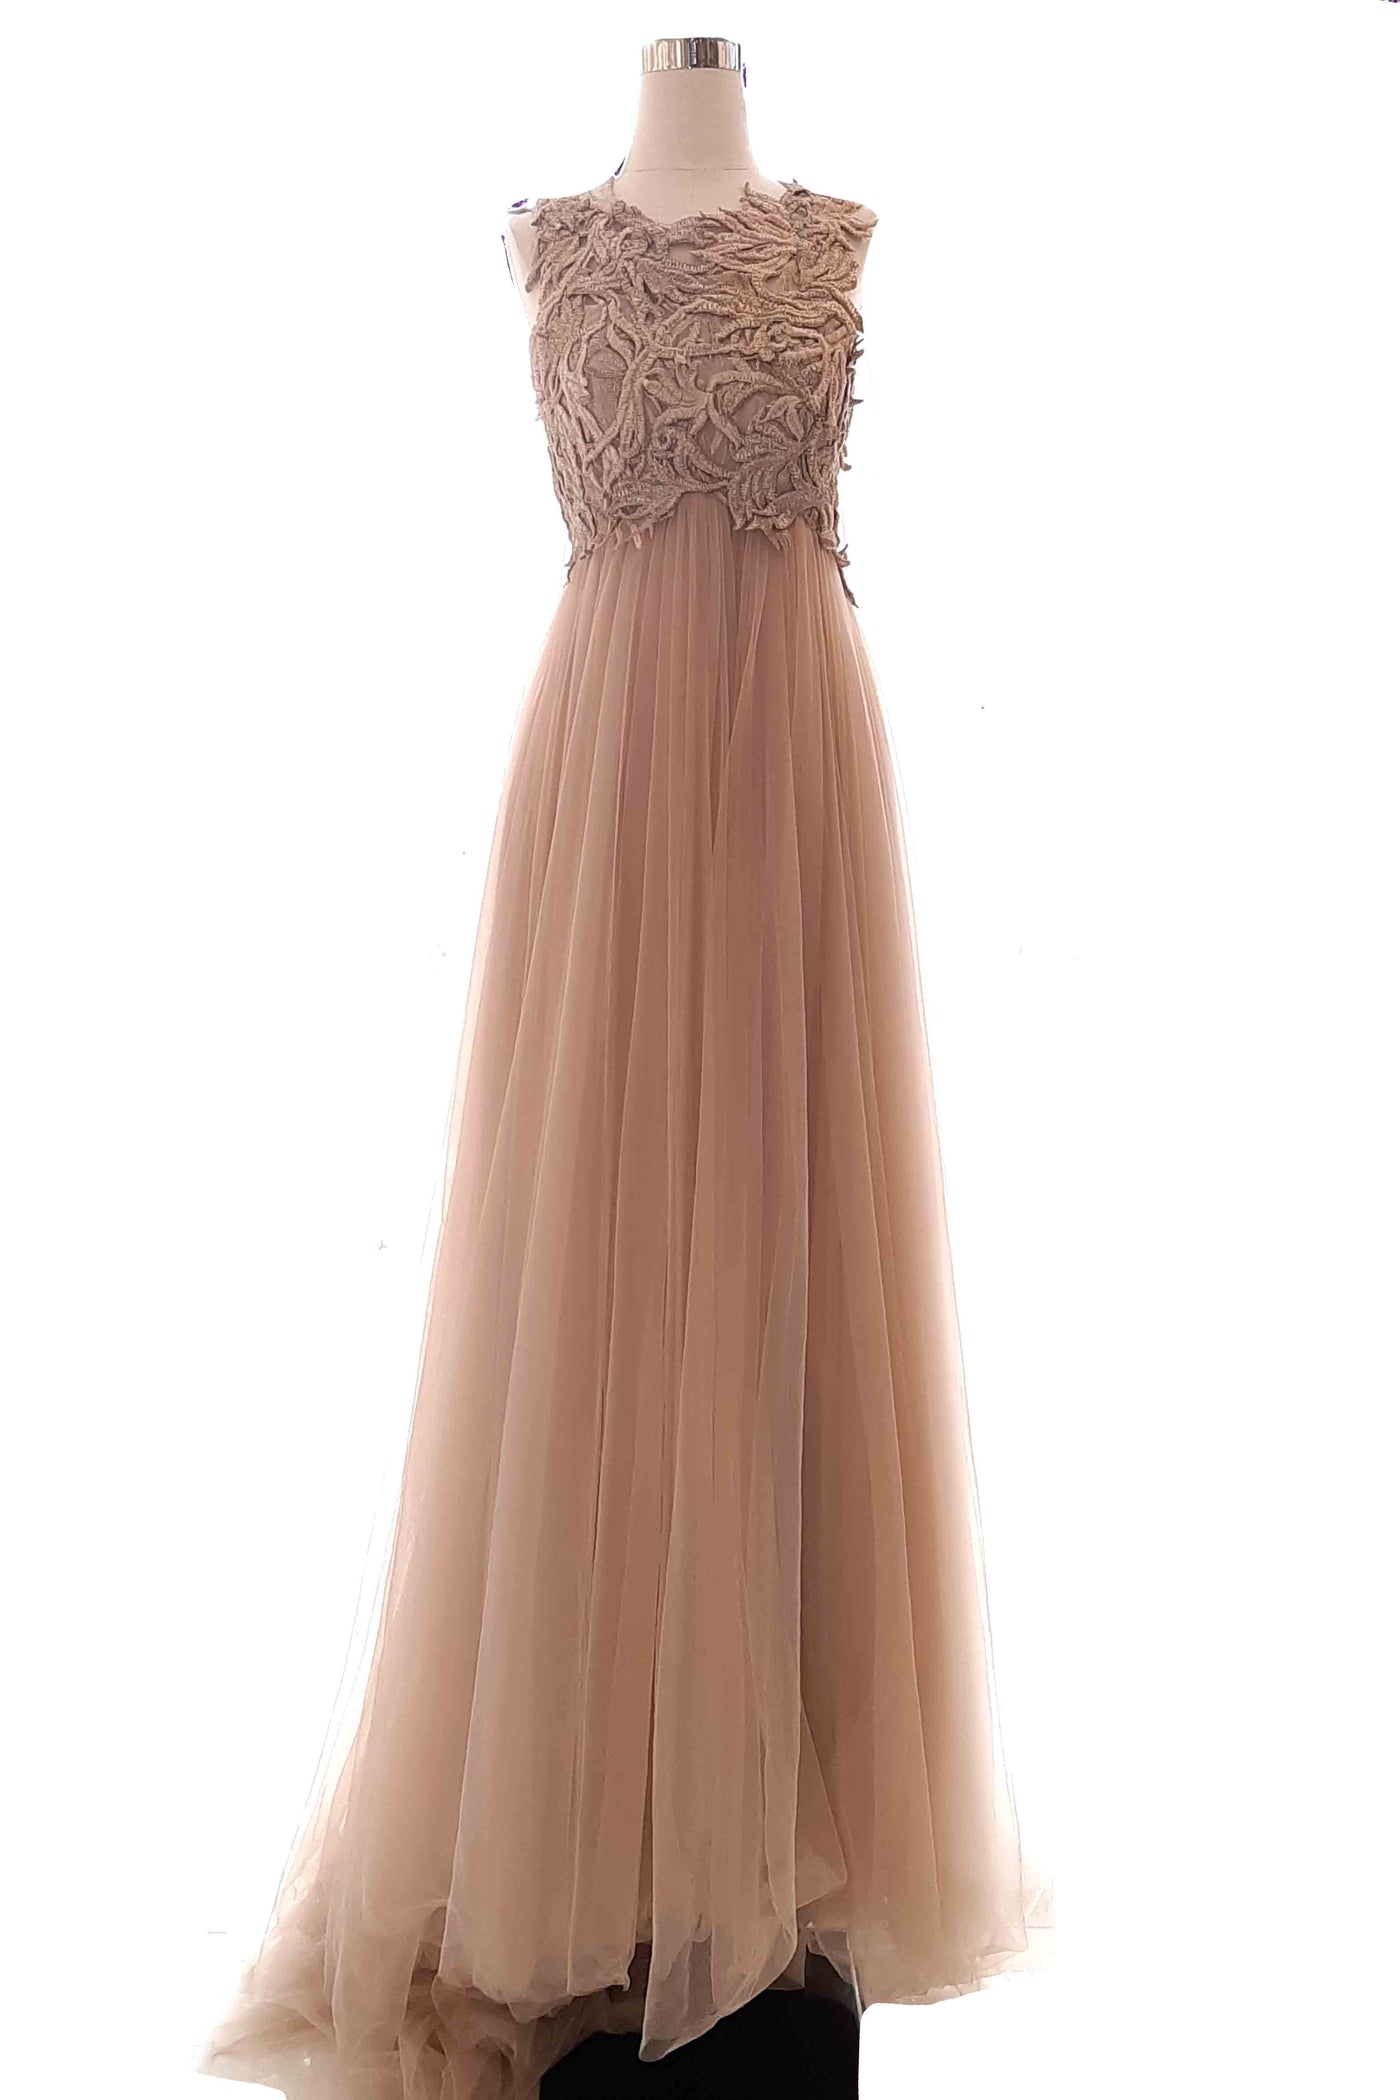 Buy : Liliana Lim - Beige Sleevless Tulle Gown